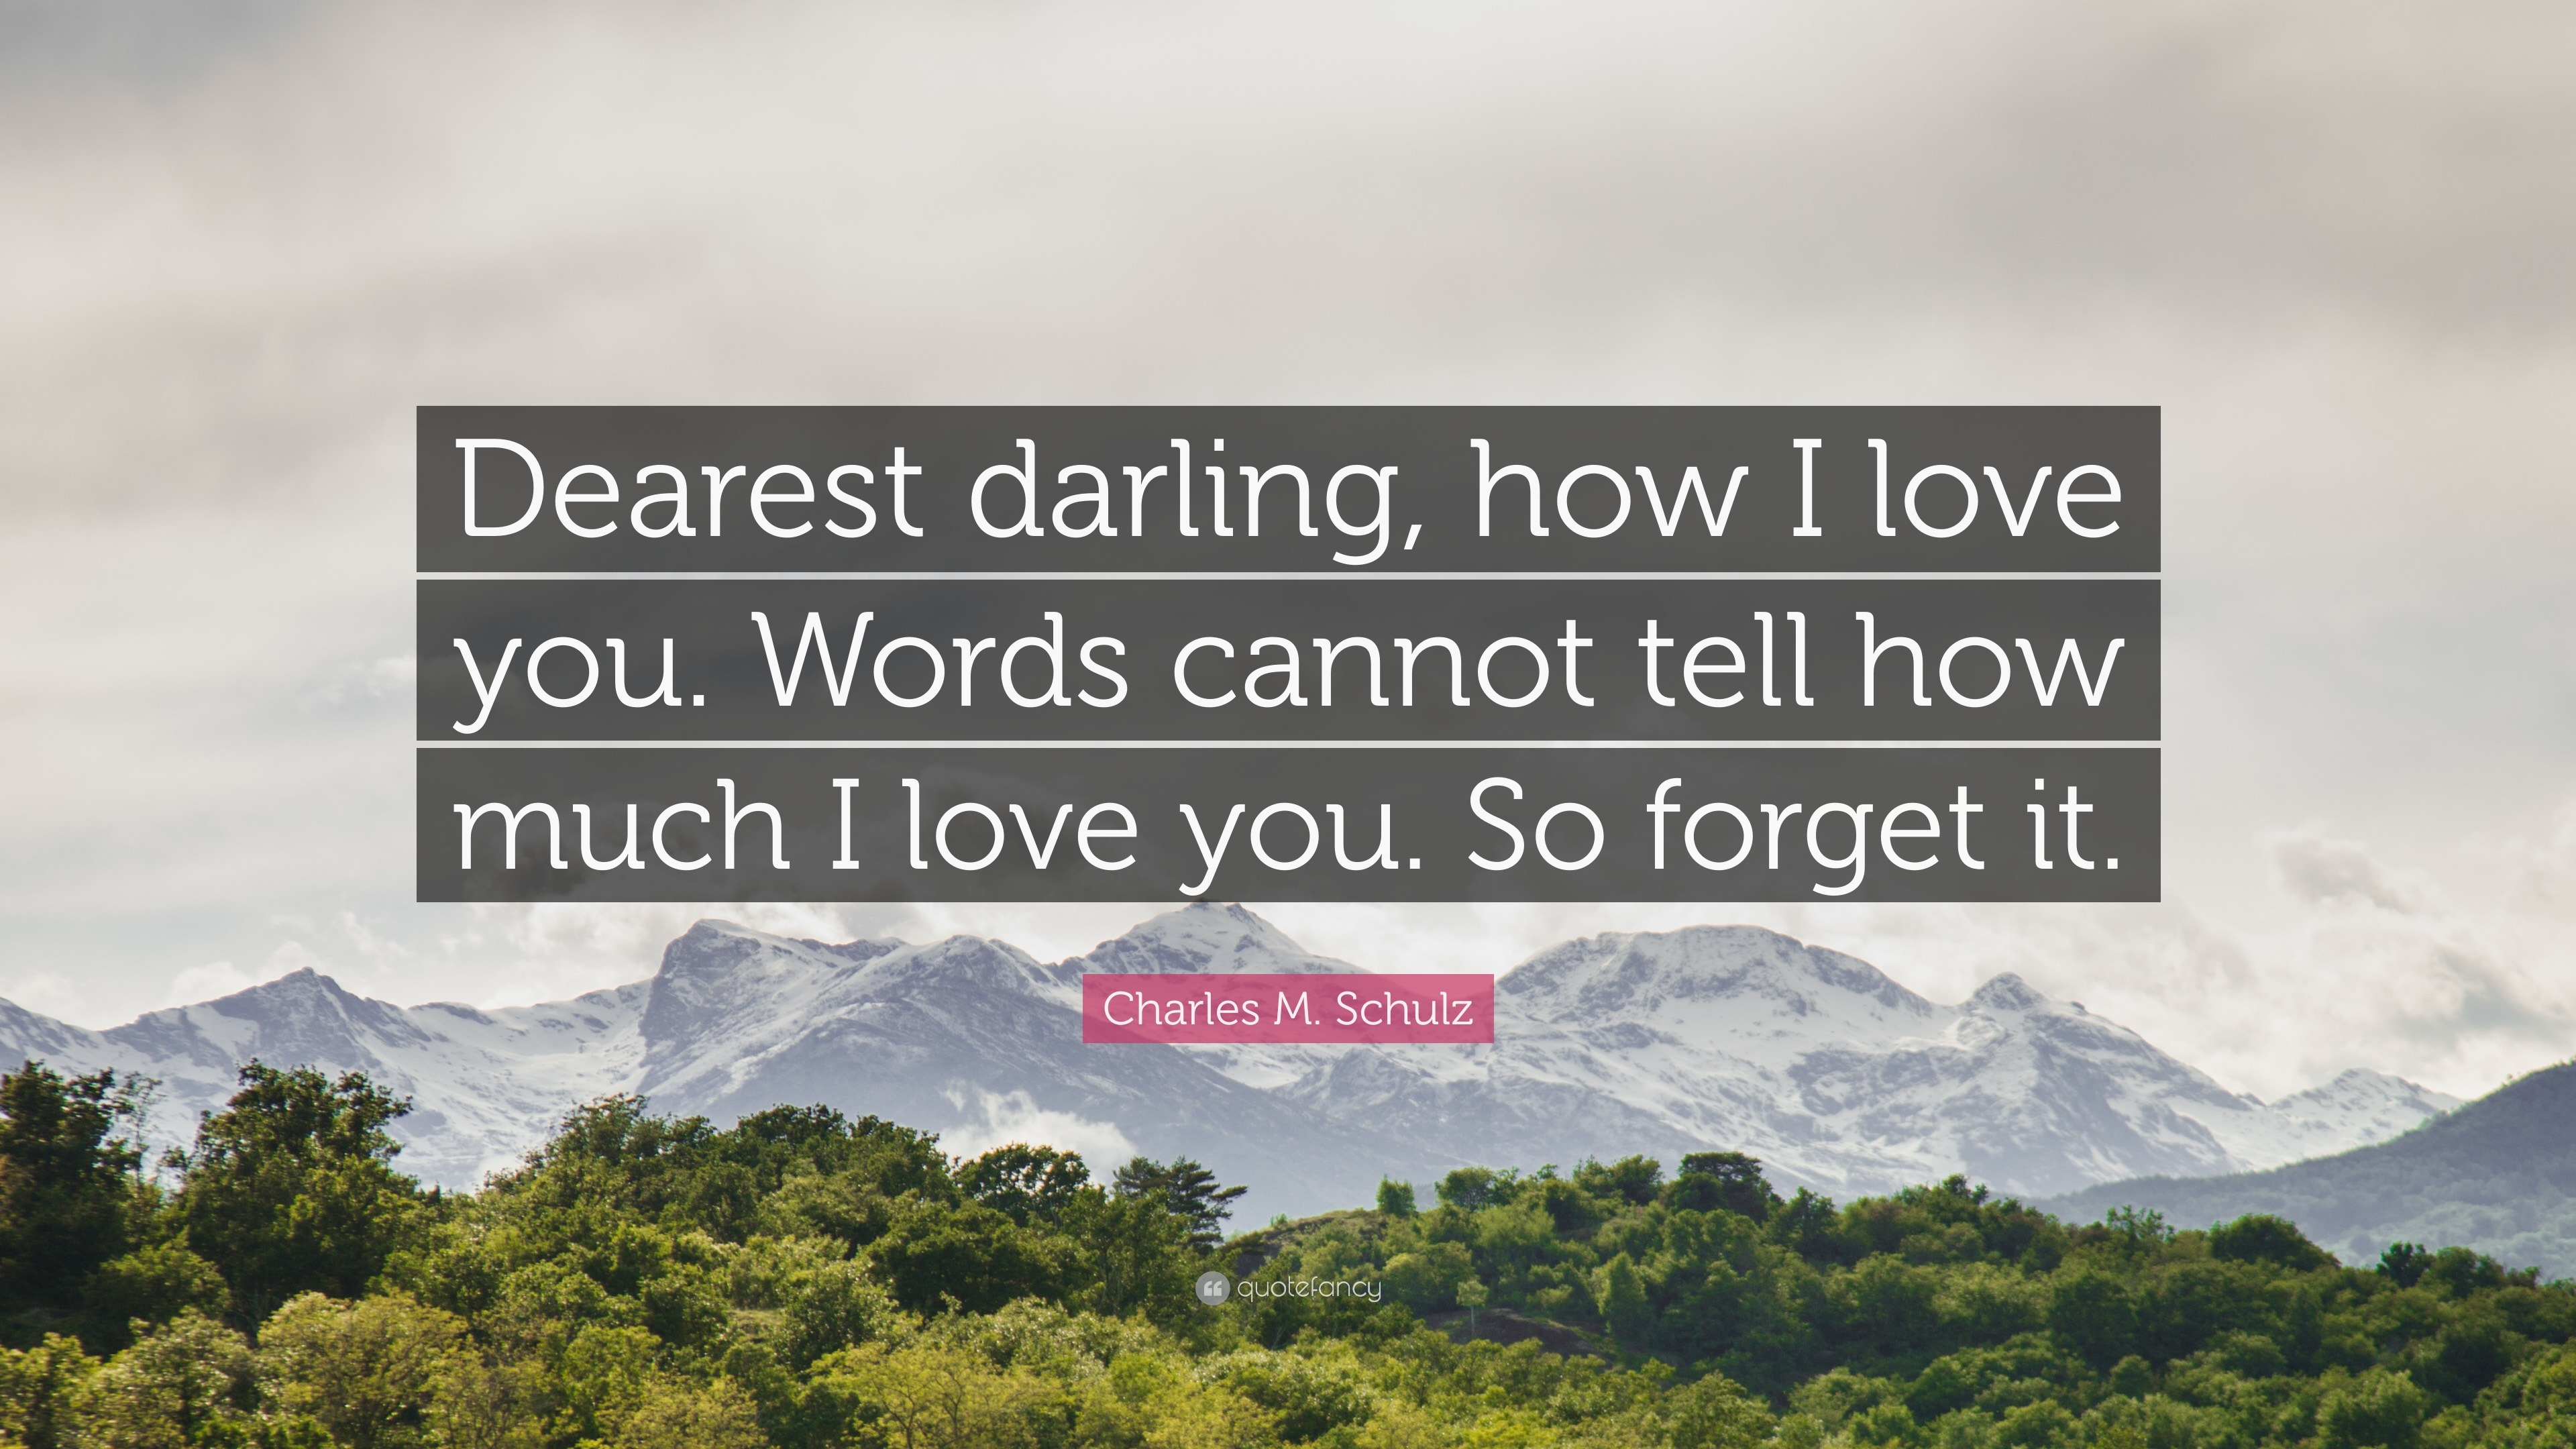 Charles M Schulz Quote “Dearest darling how I love you Words